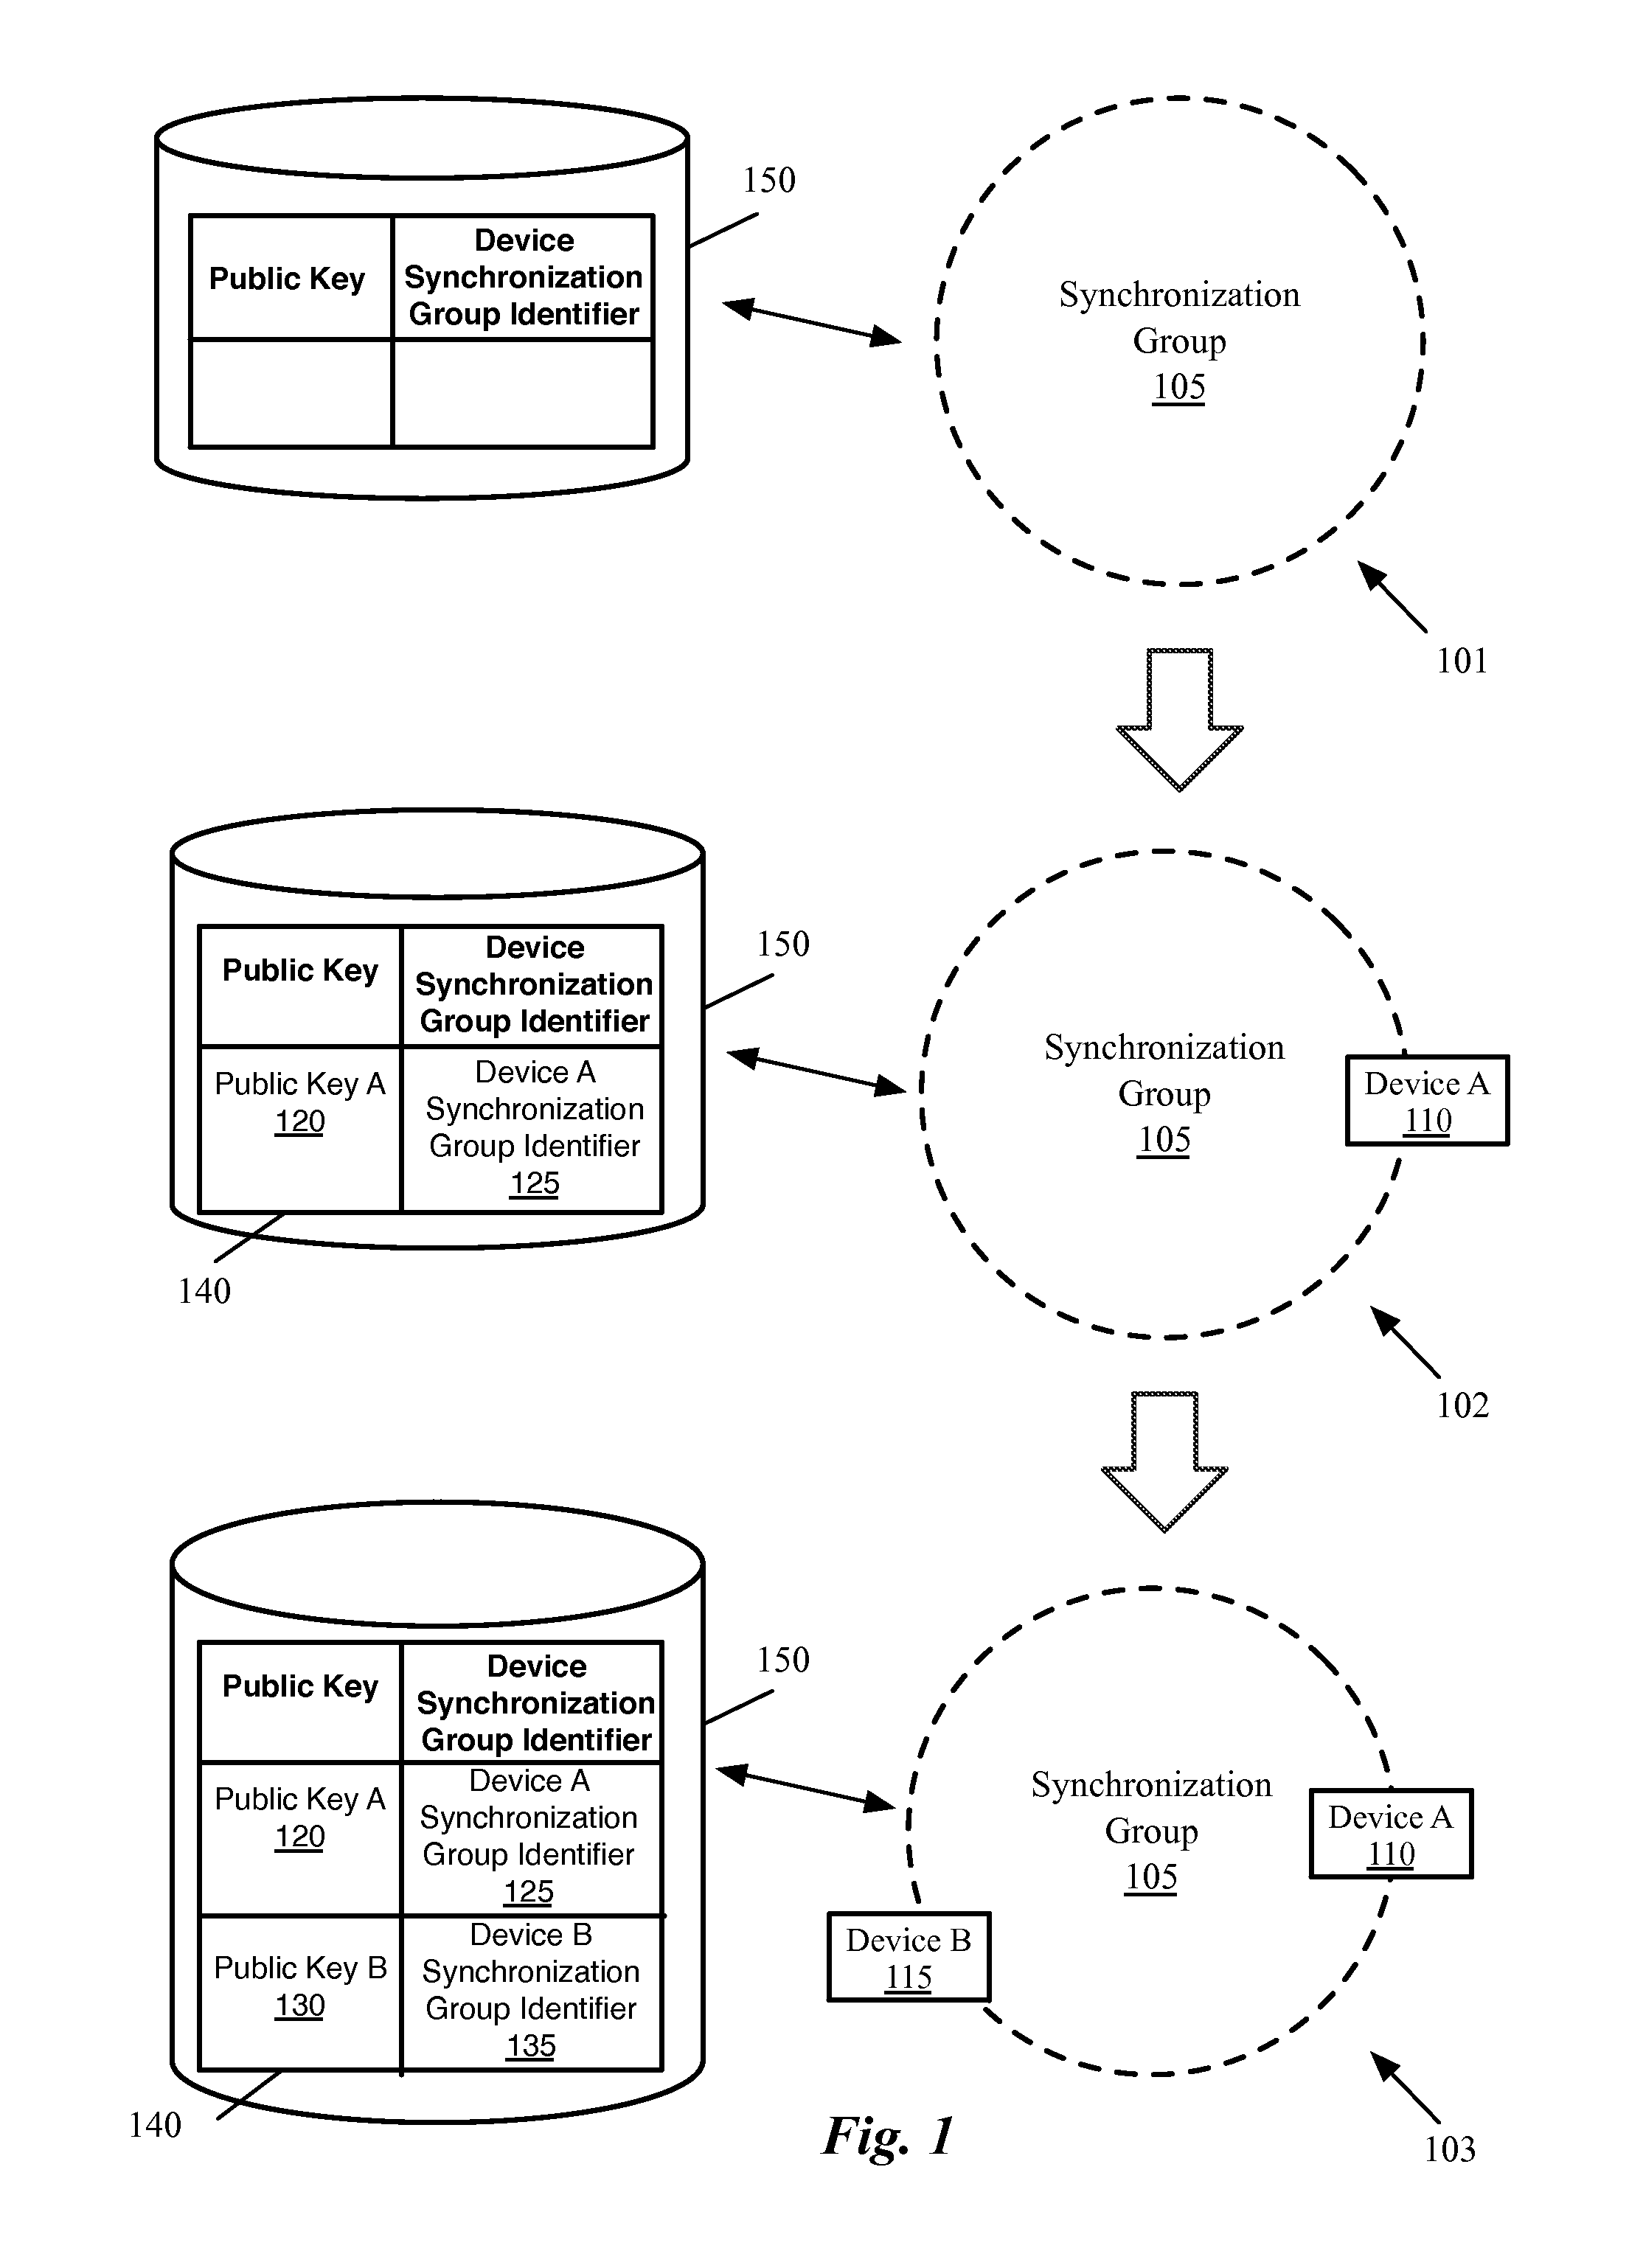 Automatic identification of invalid participants in a secure synchronization system